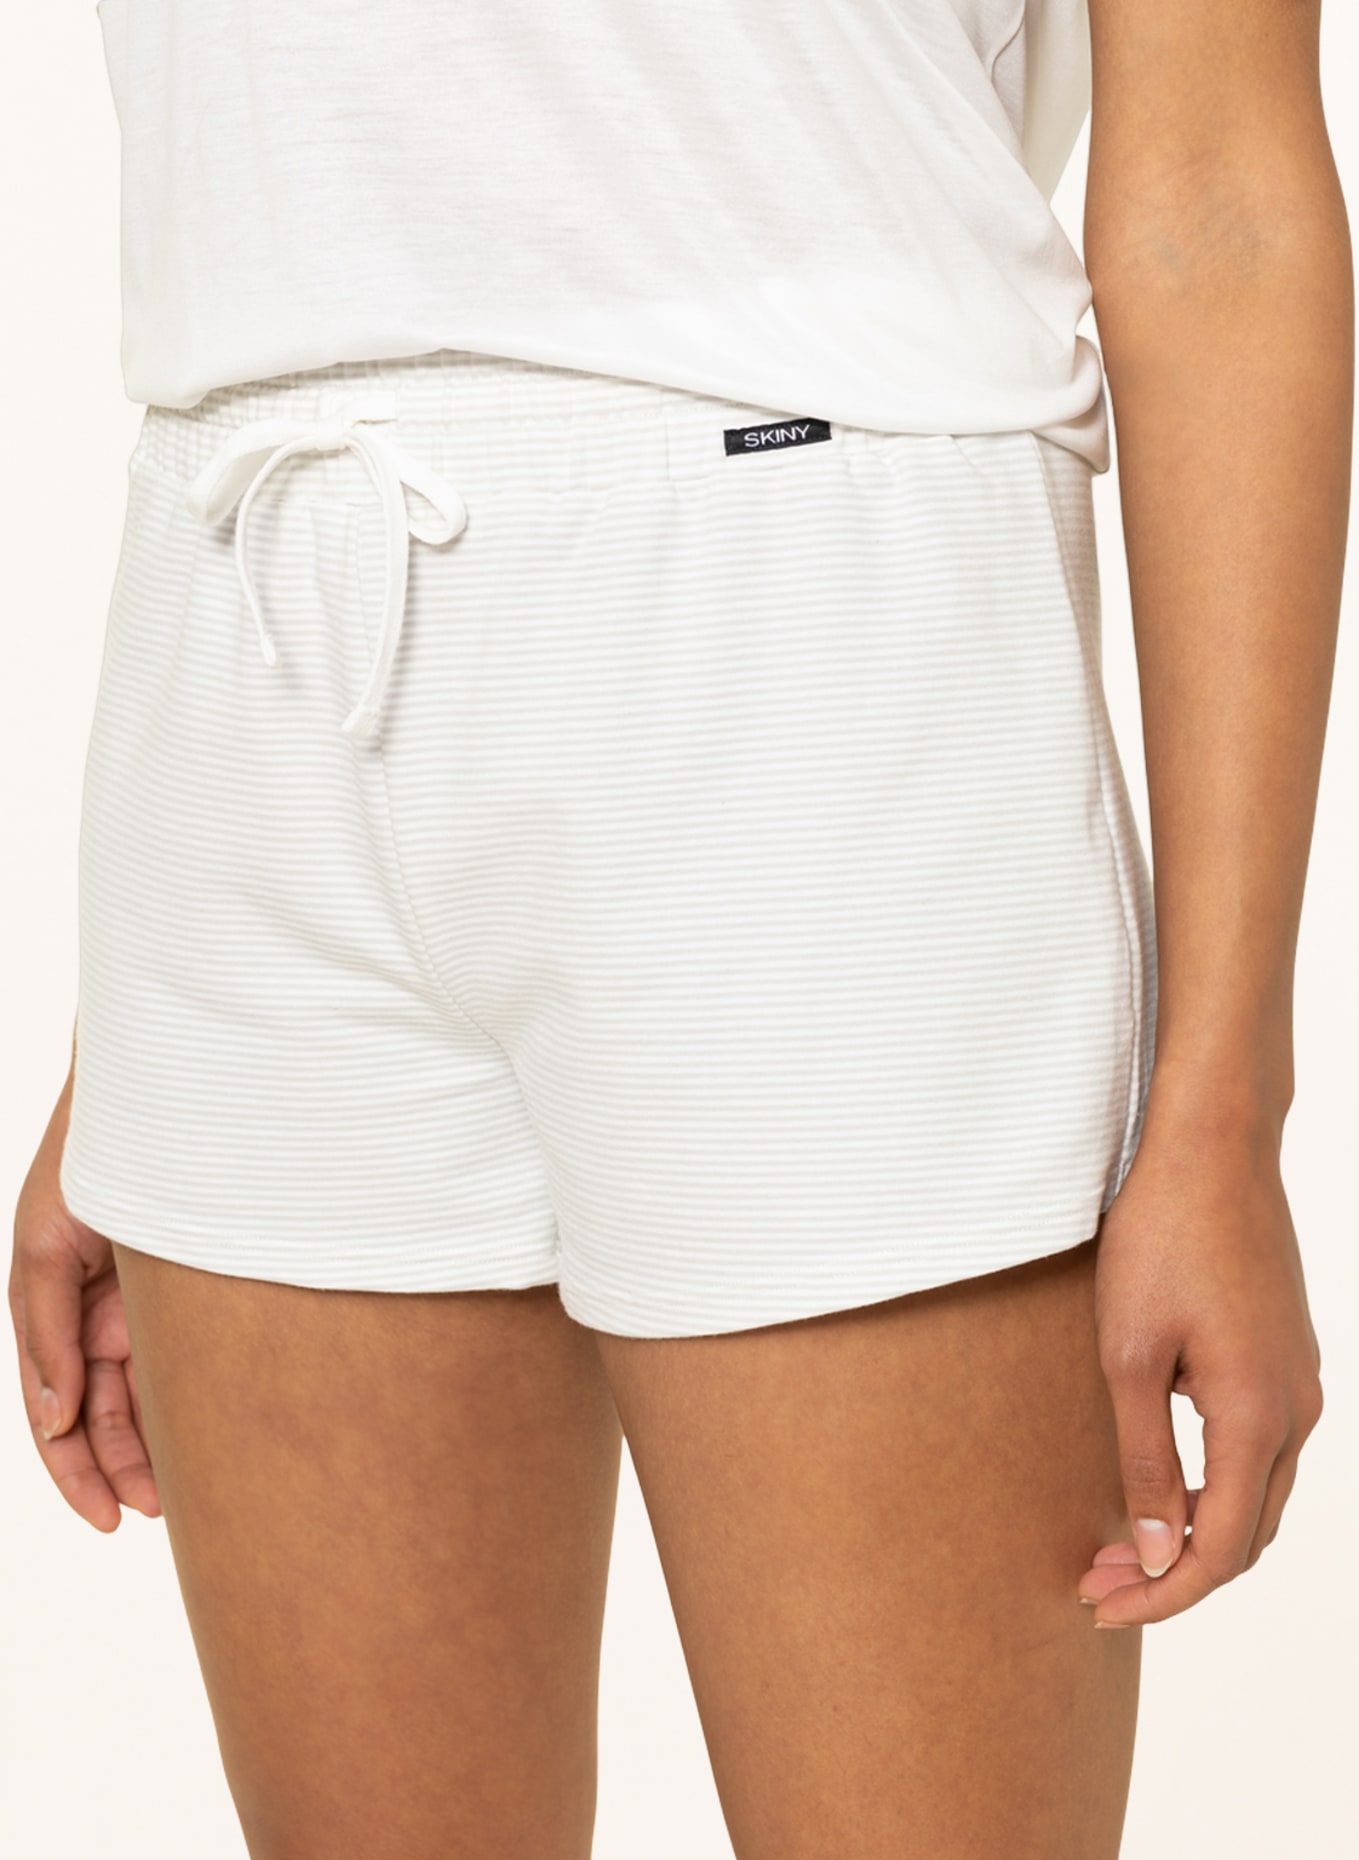 Skiny Pajama shorts EVERY NIGHT IN MIX & MATCH , Color: WHITE/ LIGHT GRAY (Image 5)